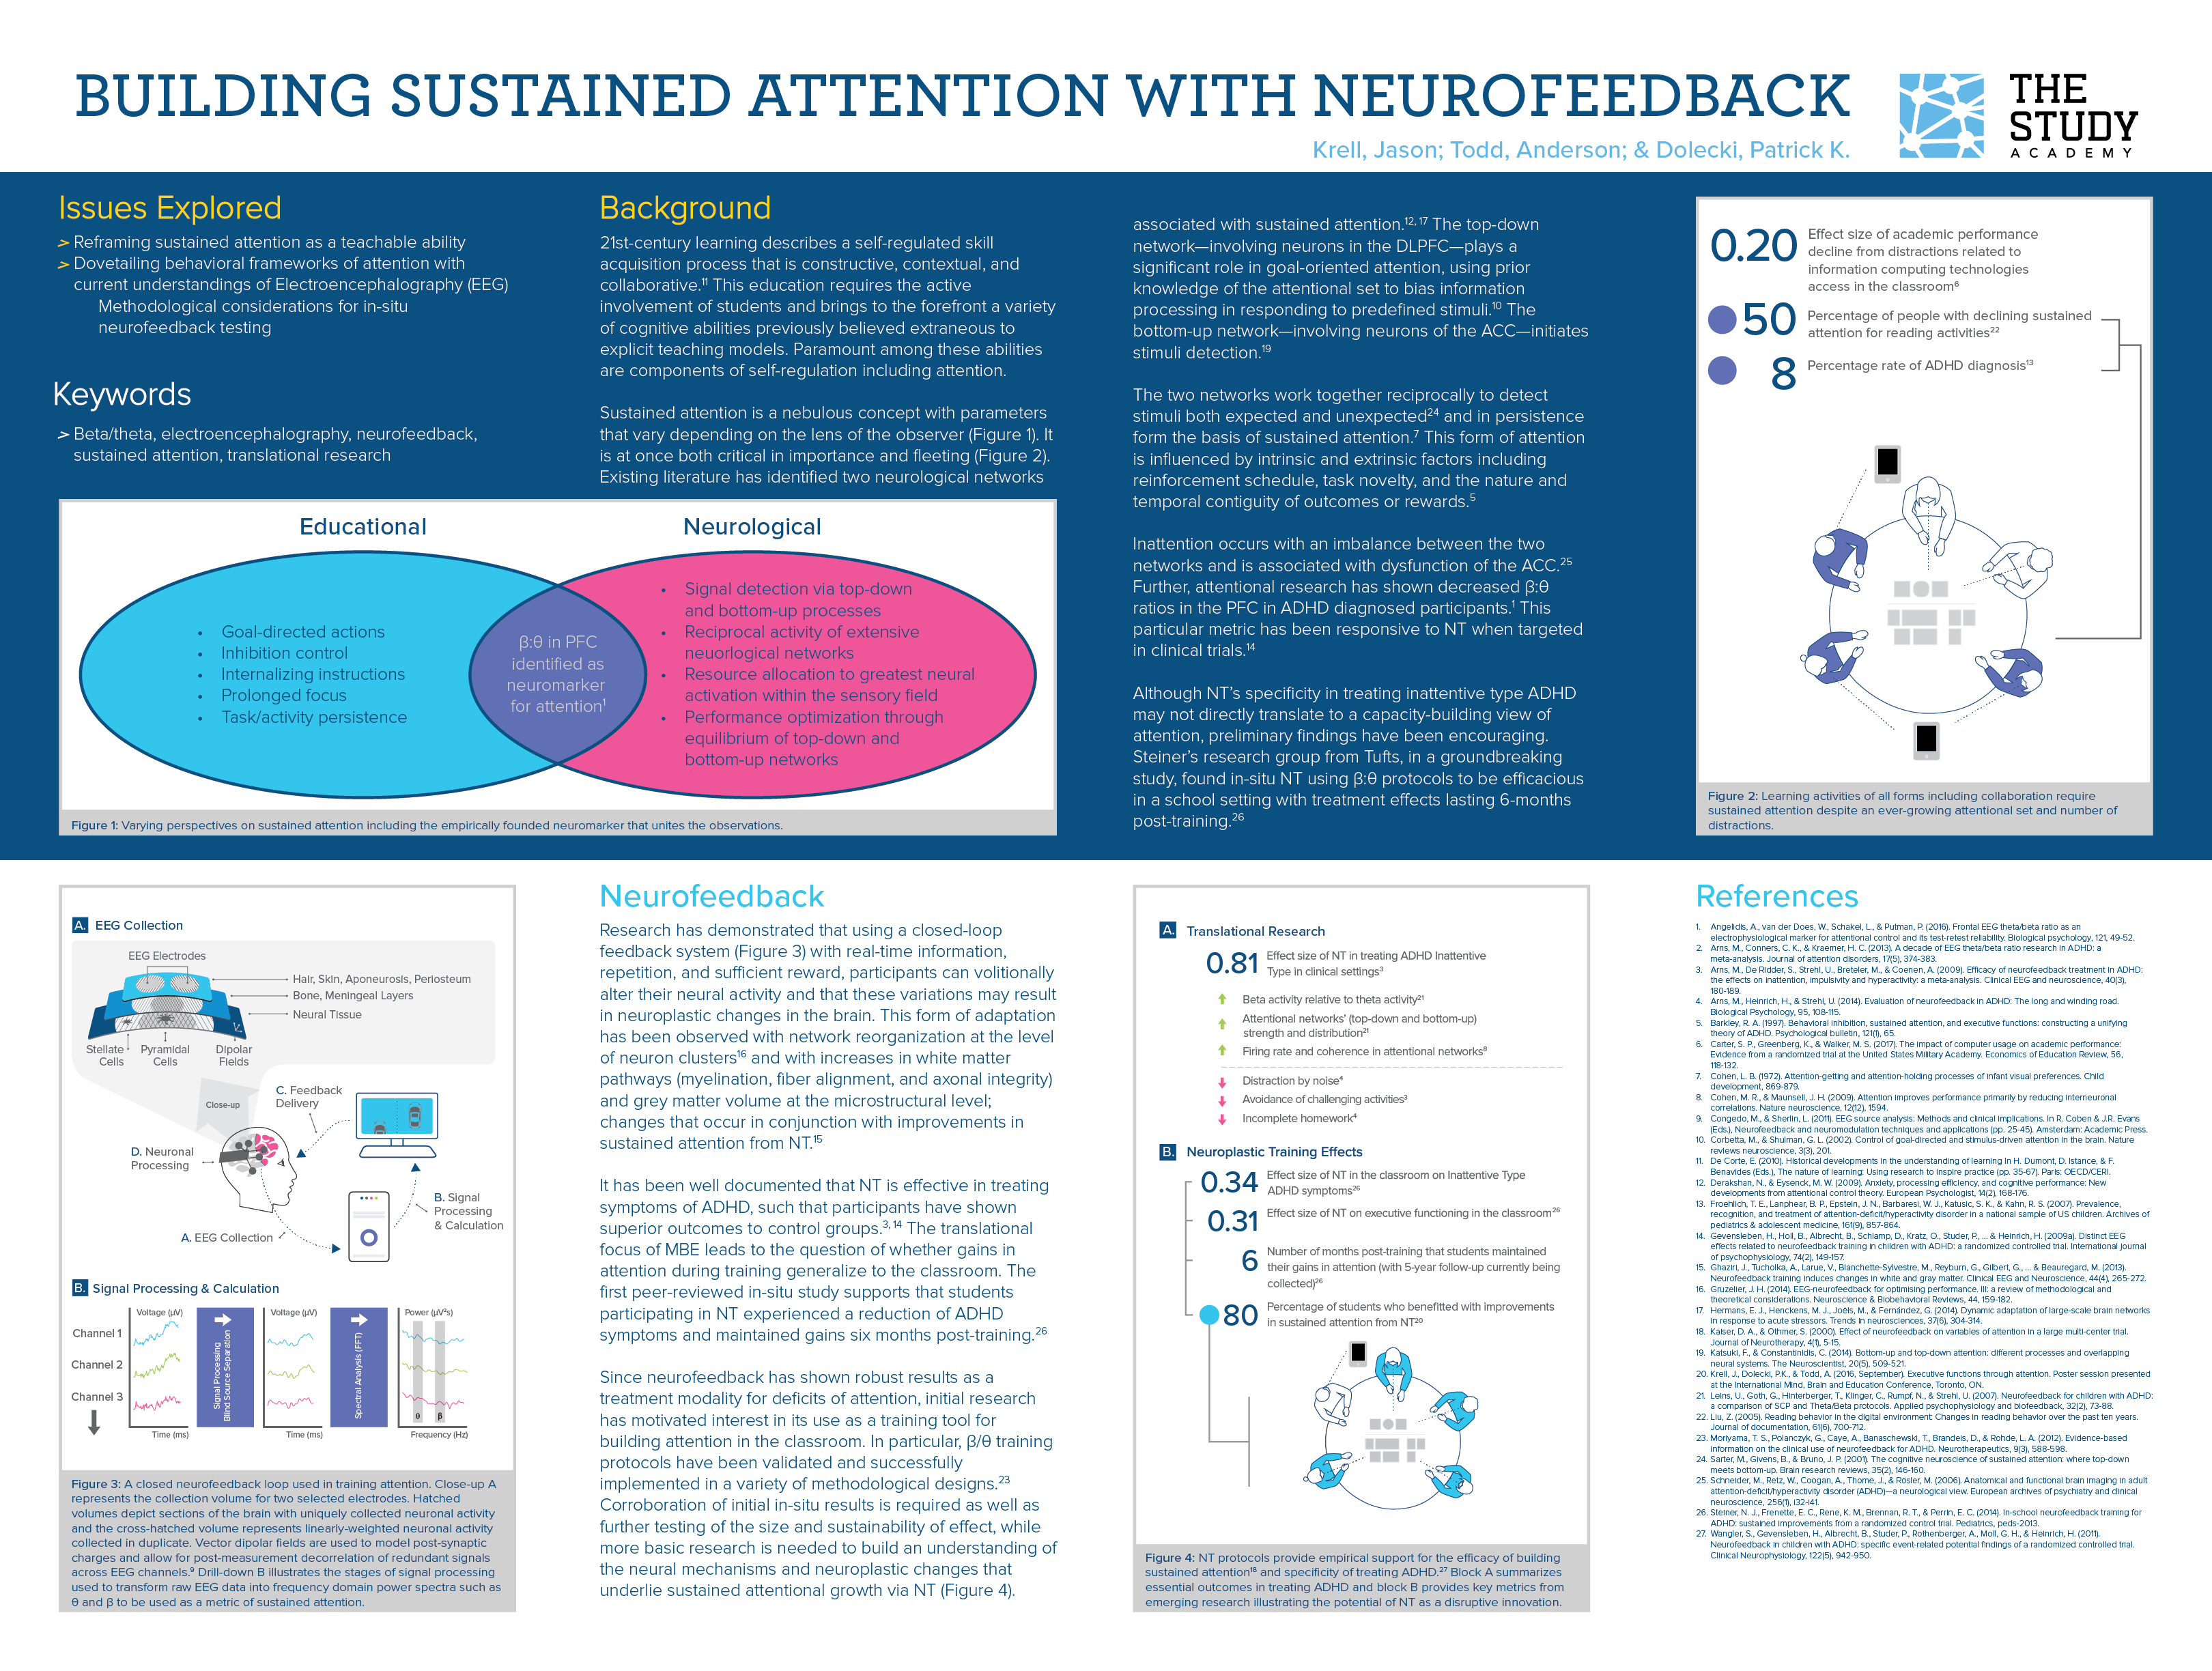 Poster board of "Building Sustained Attention with Neurofeedback"